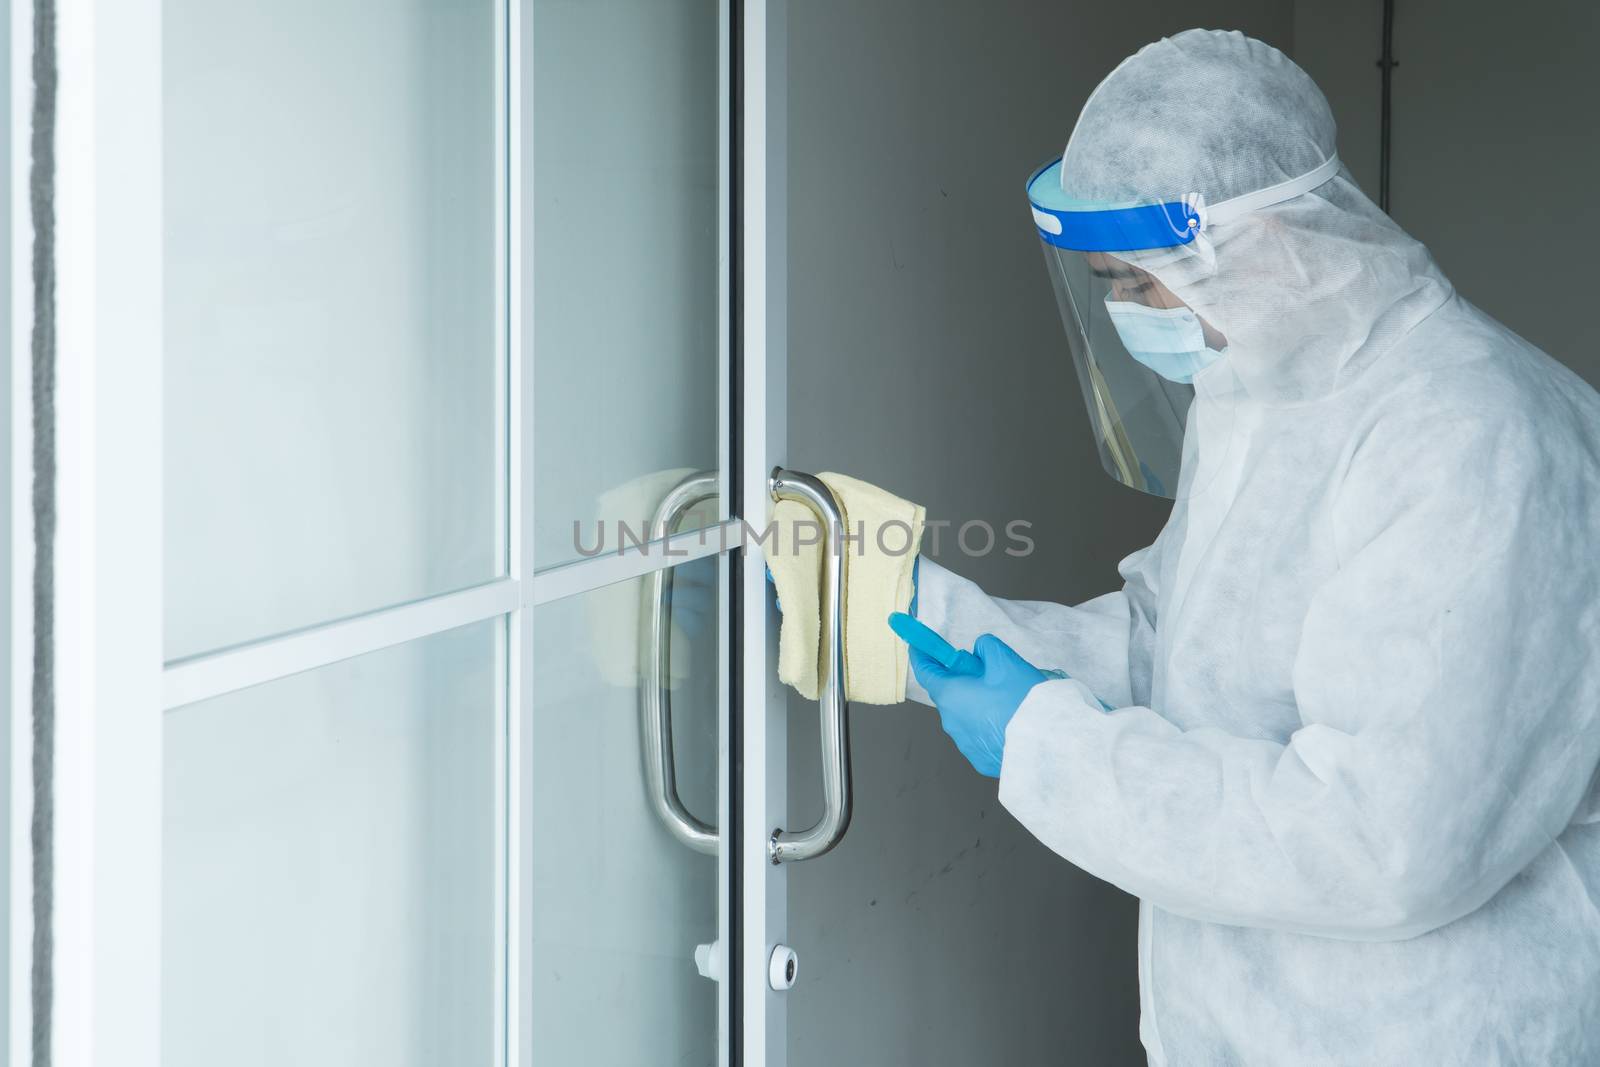 Workers wear protective clothing and wear a mask. Spraying disinfectants for cleaning inside the building. Cleaning service professionals are becoming popular After the spread of coronavirus